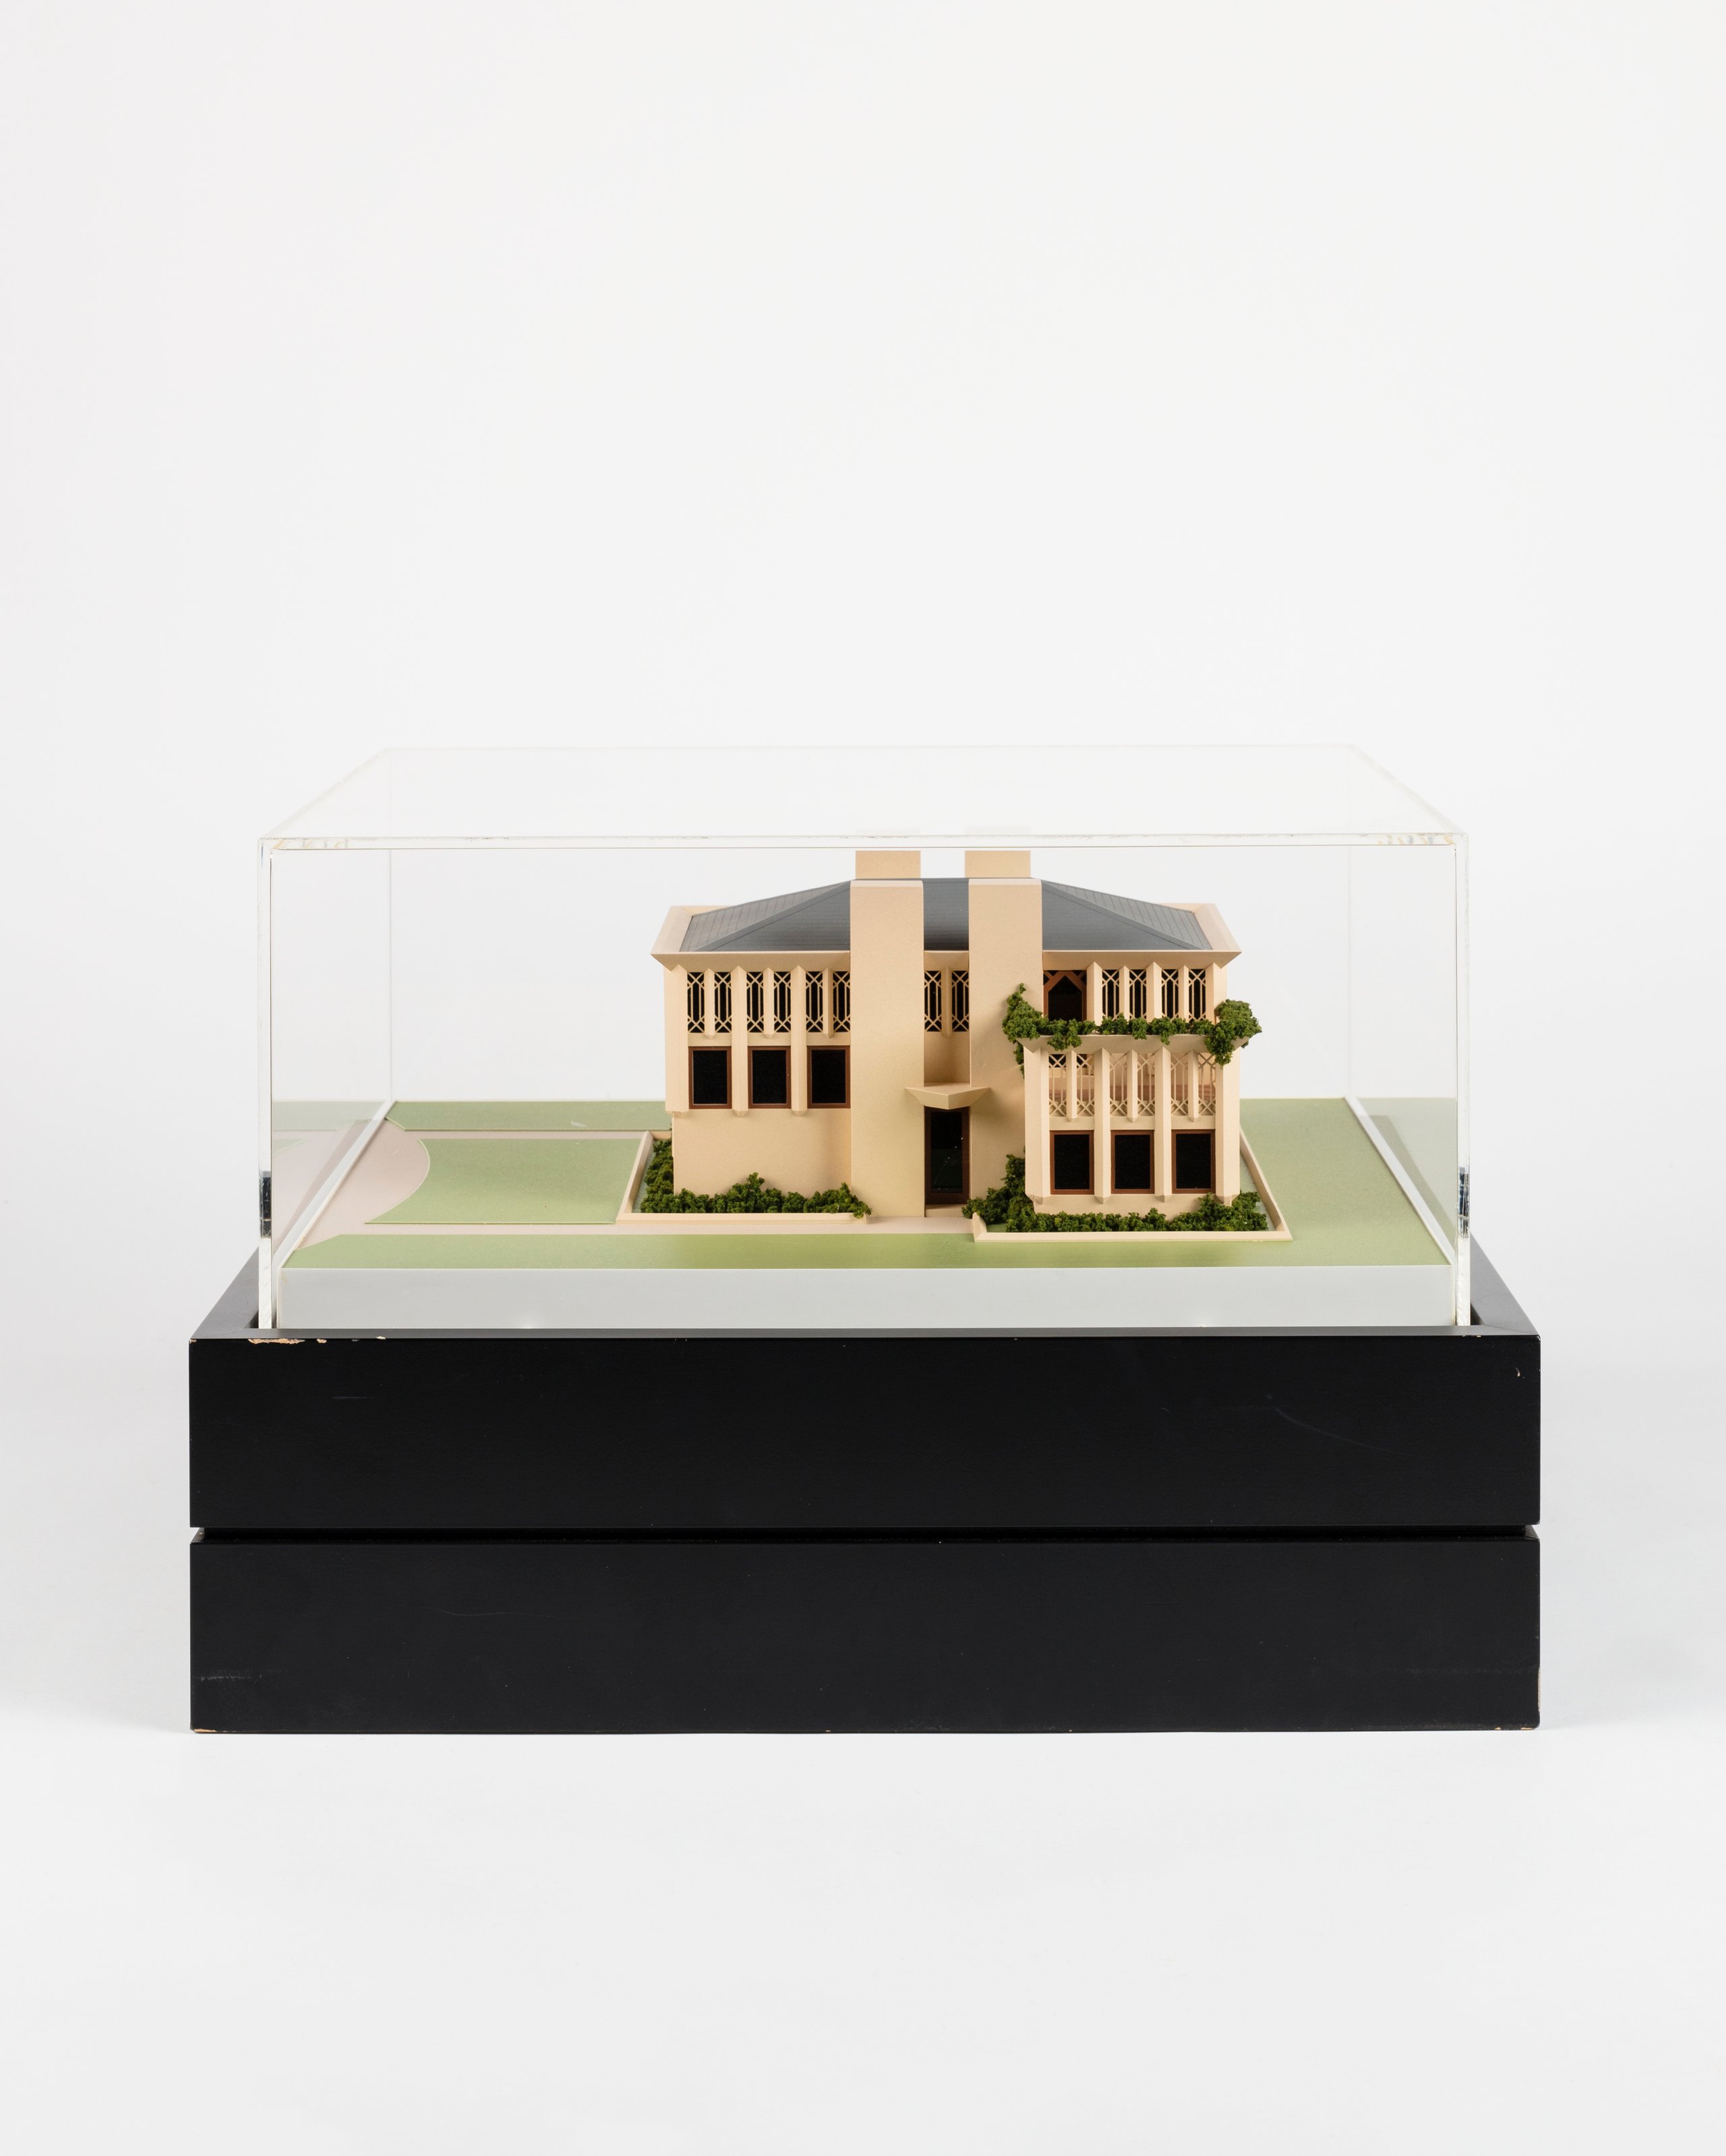 'Own House' architectural model designed by Marion Mahony and Walter Burley Griffin